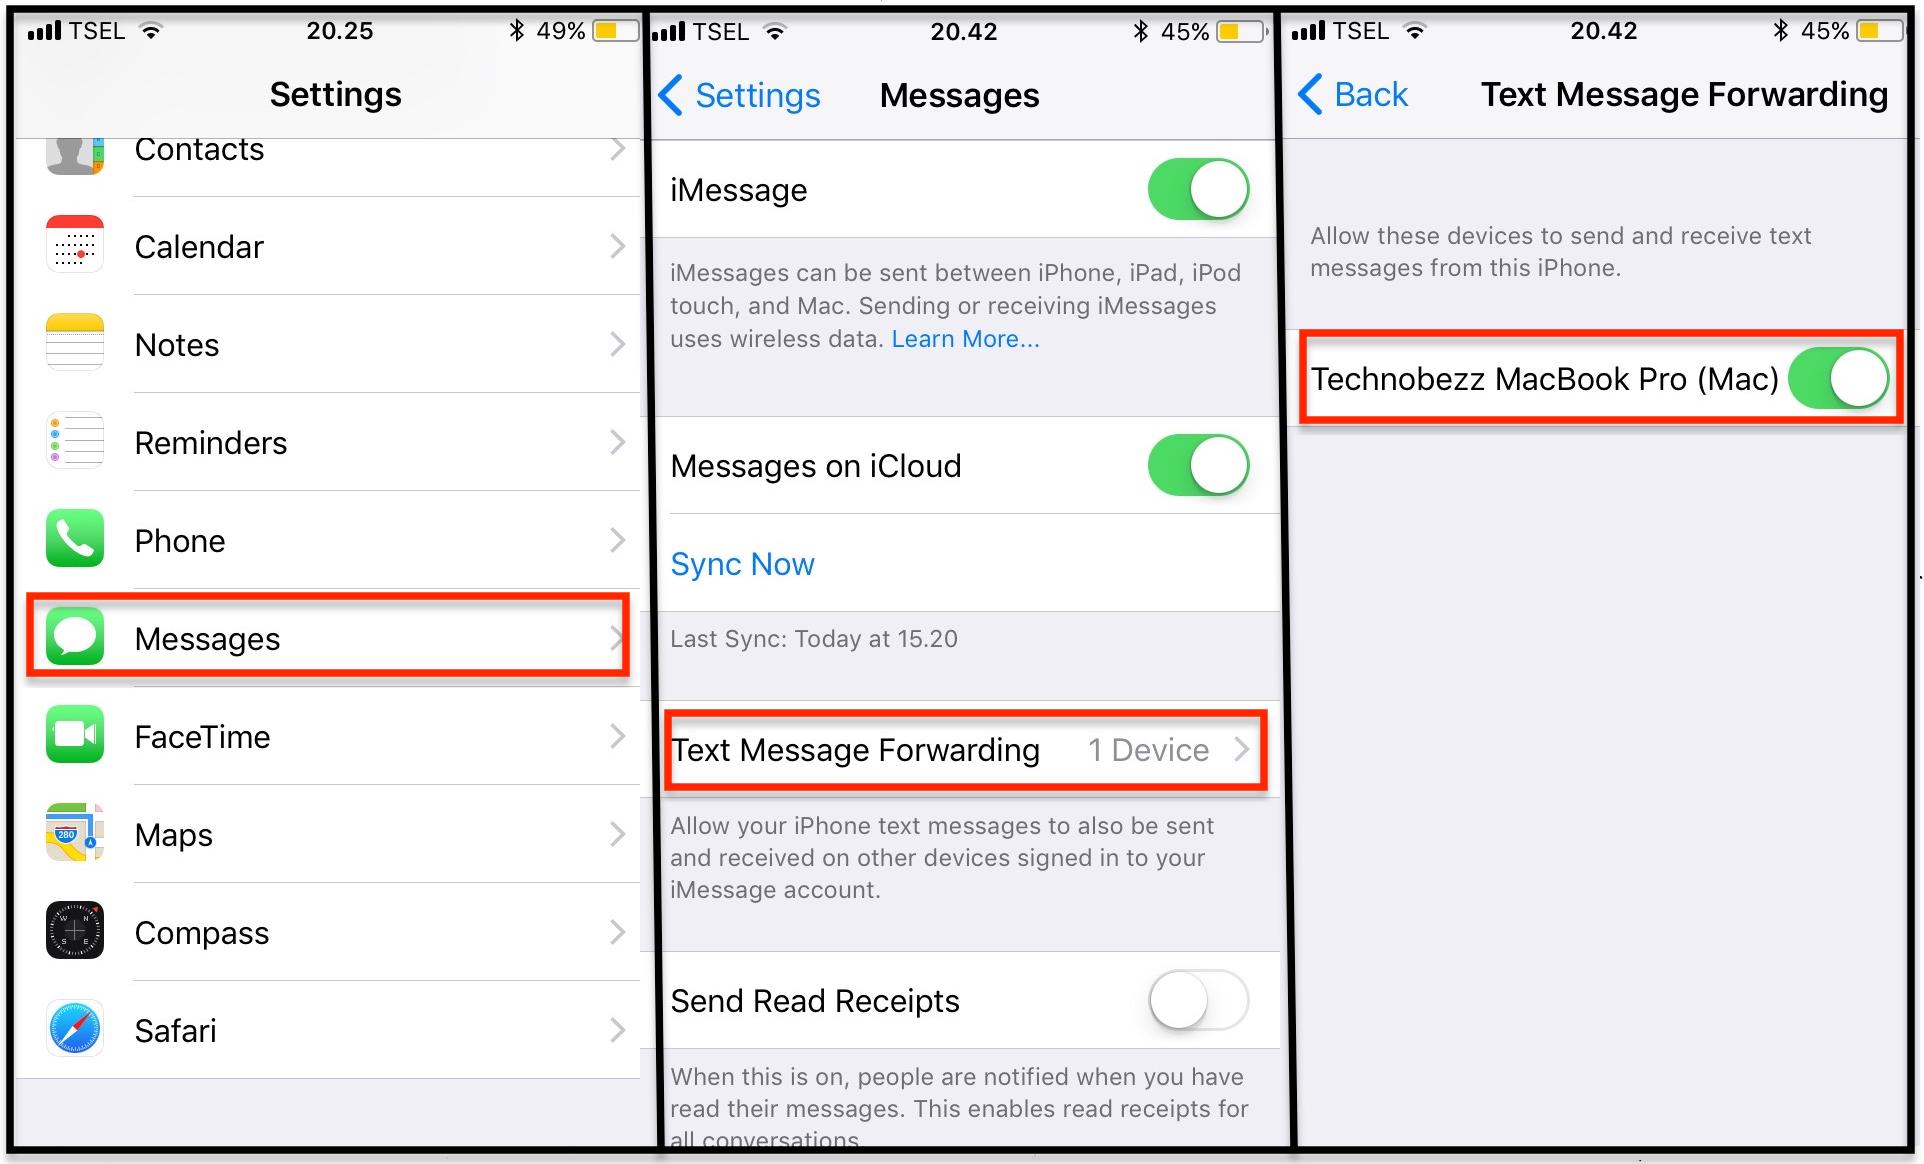 How To Send And Receive Text Messages On A Mac